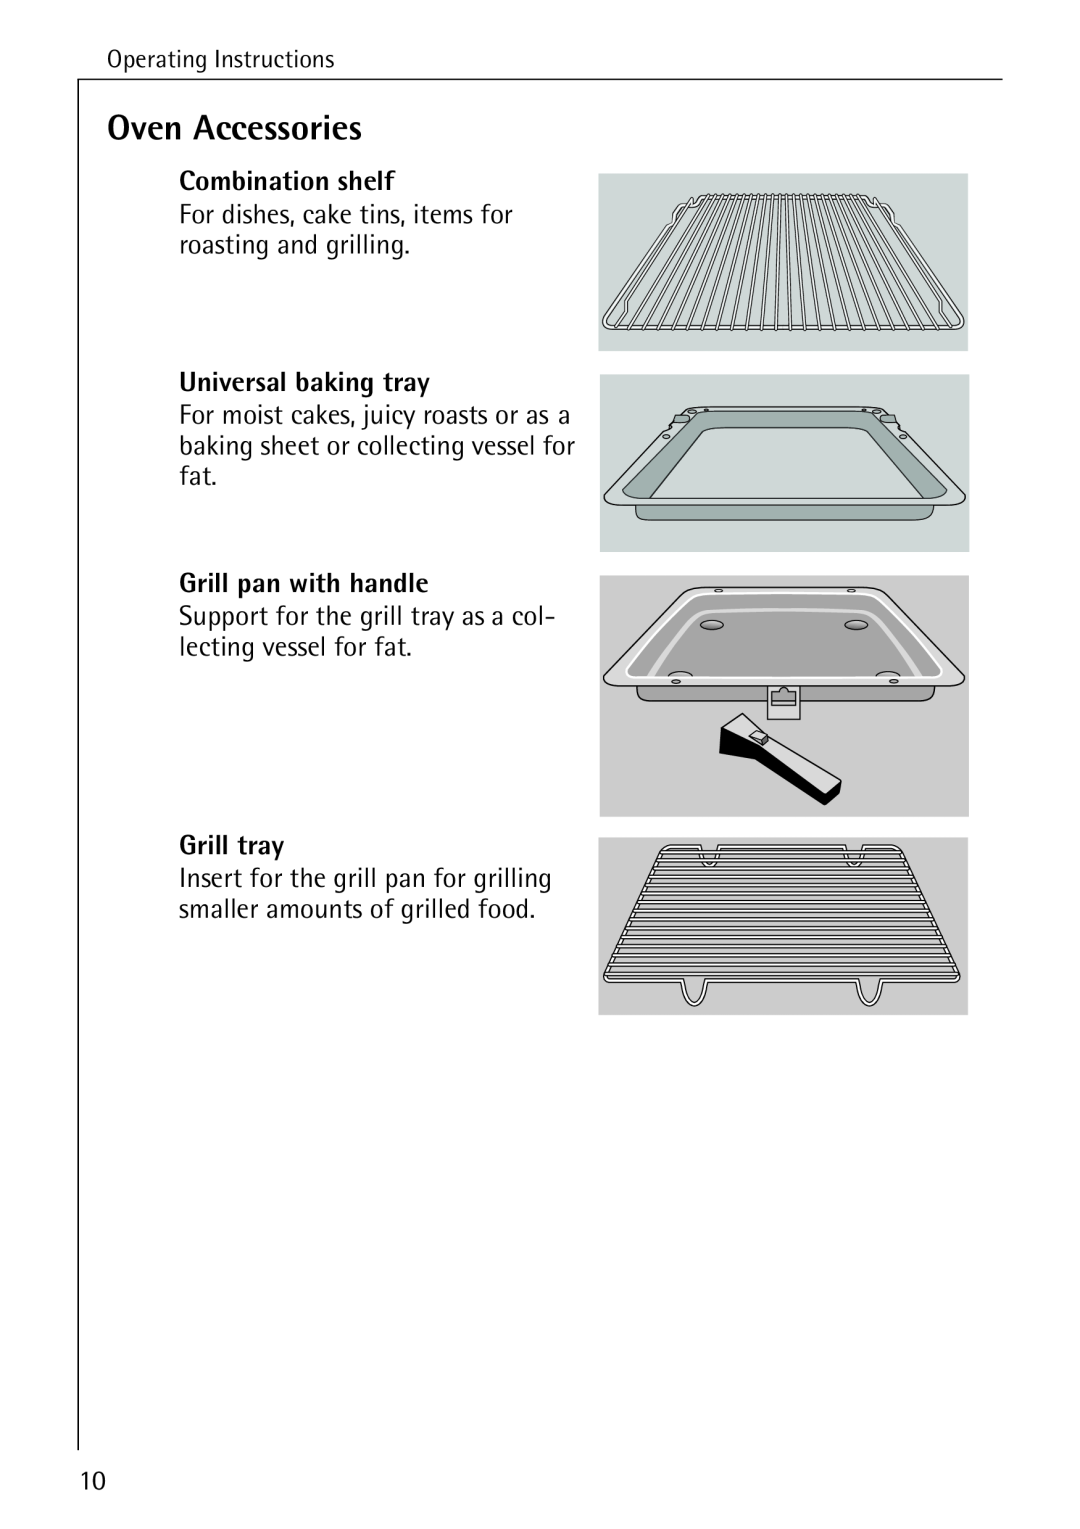 Electrolux B6140-1 manual Oven Accessories, Combination shelf, Universal baking tray, Grill pan with handle, Grill tray 